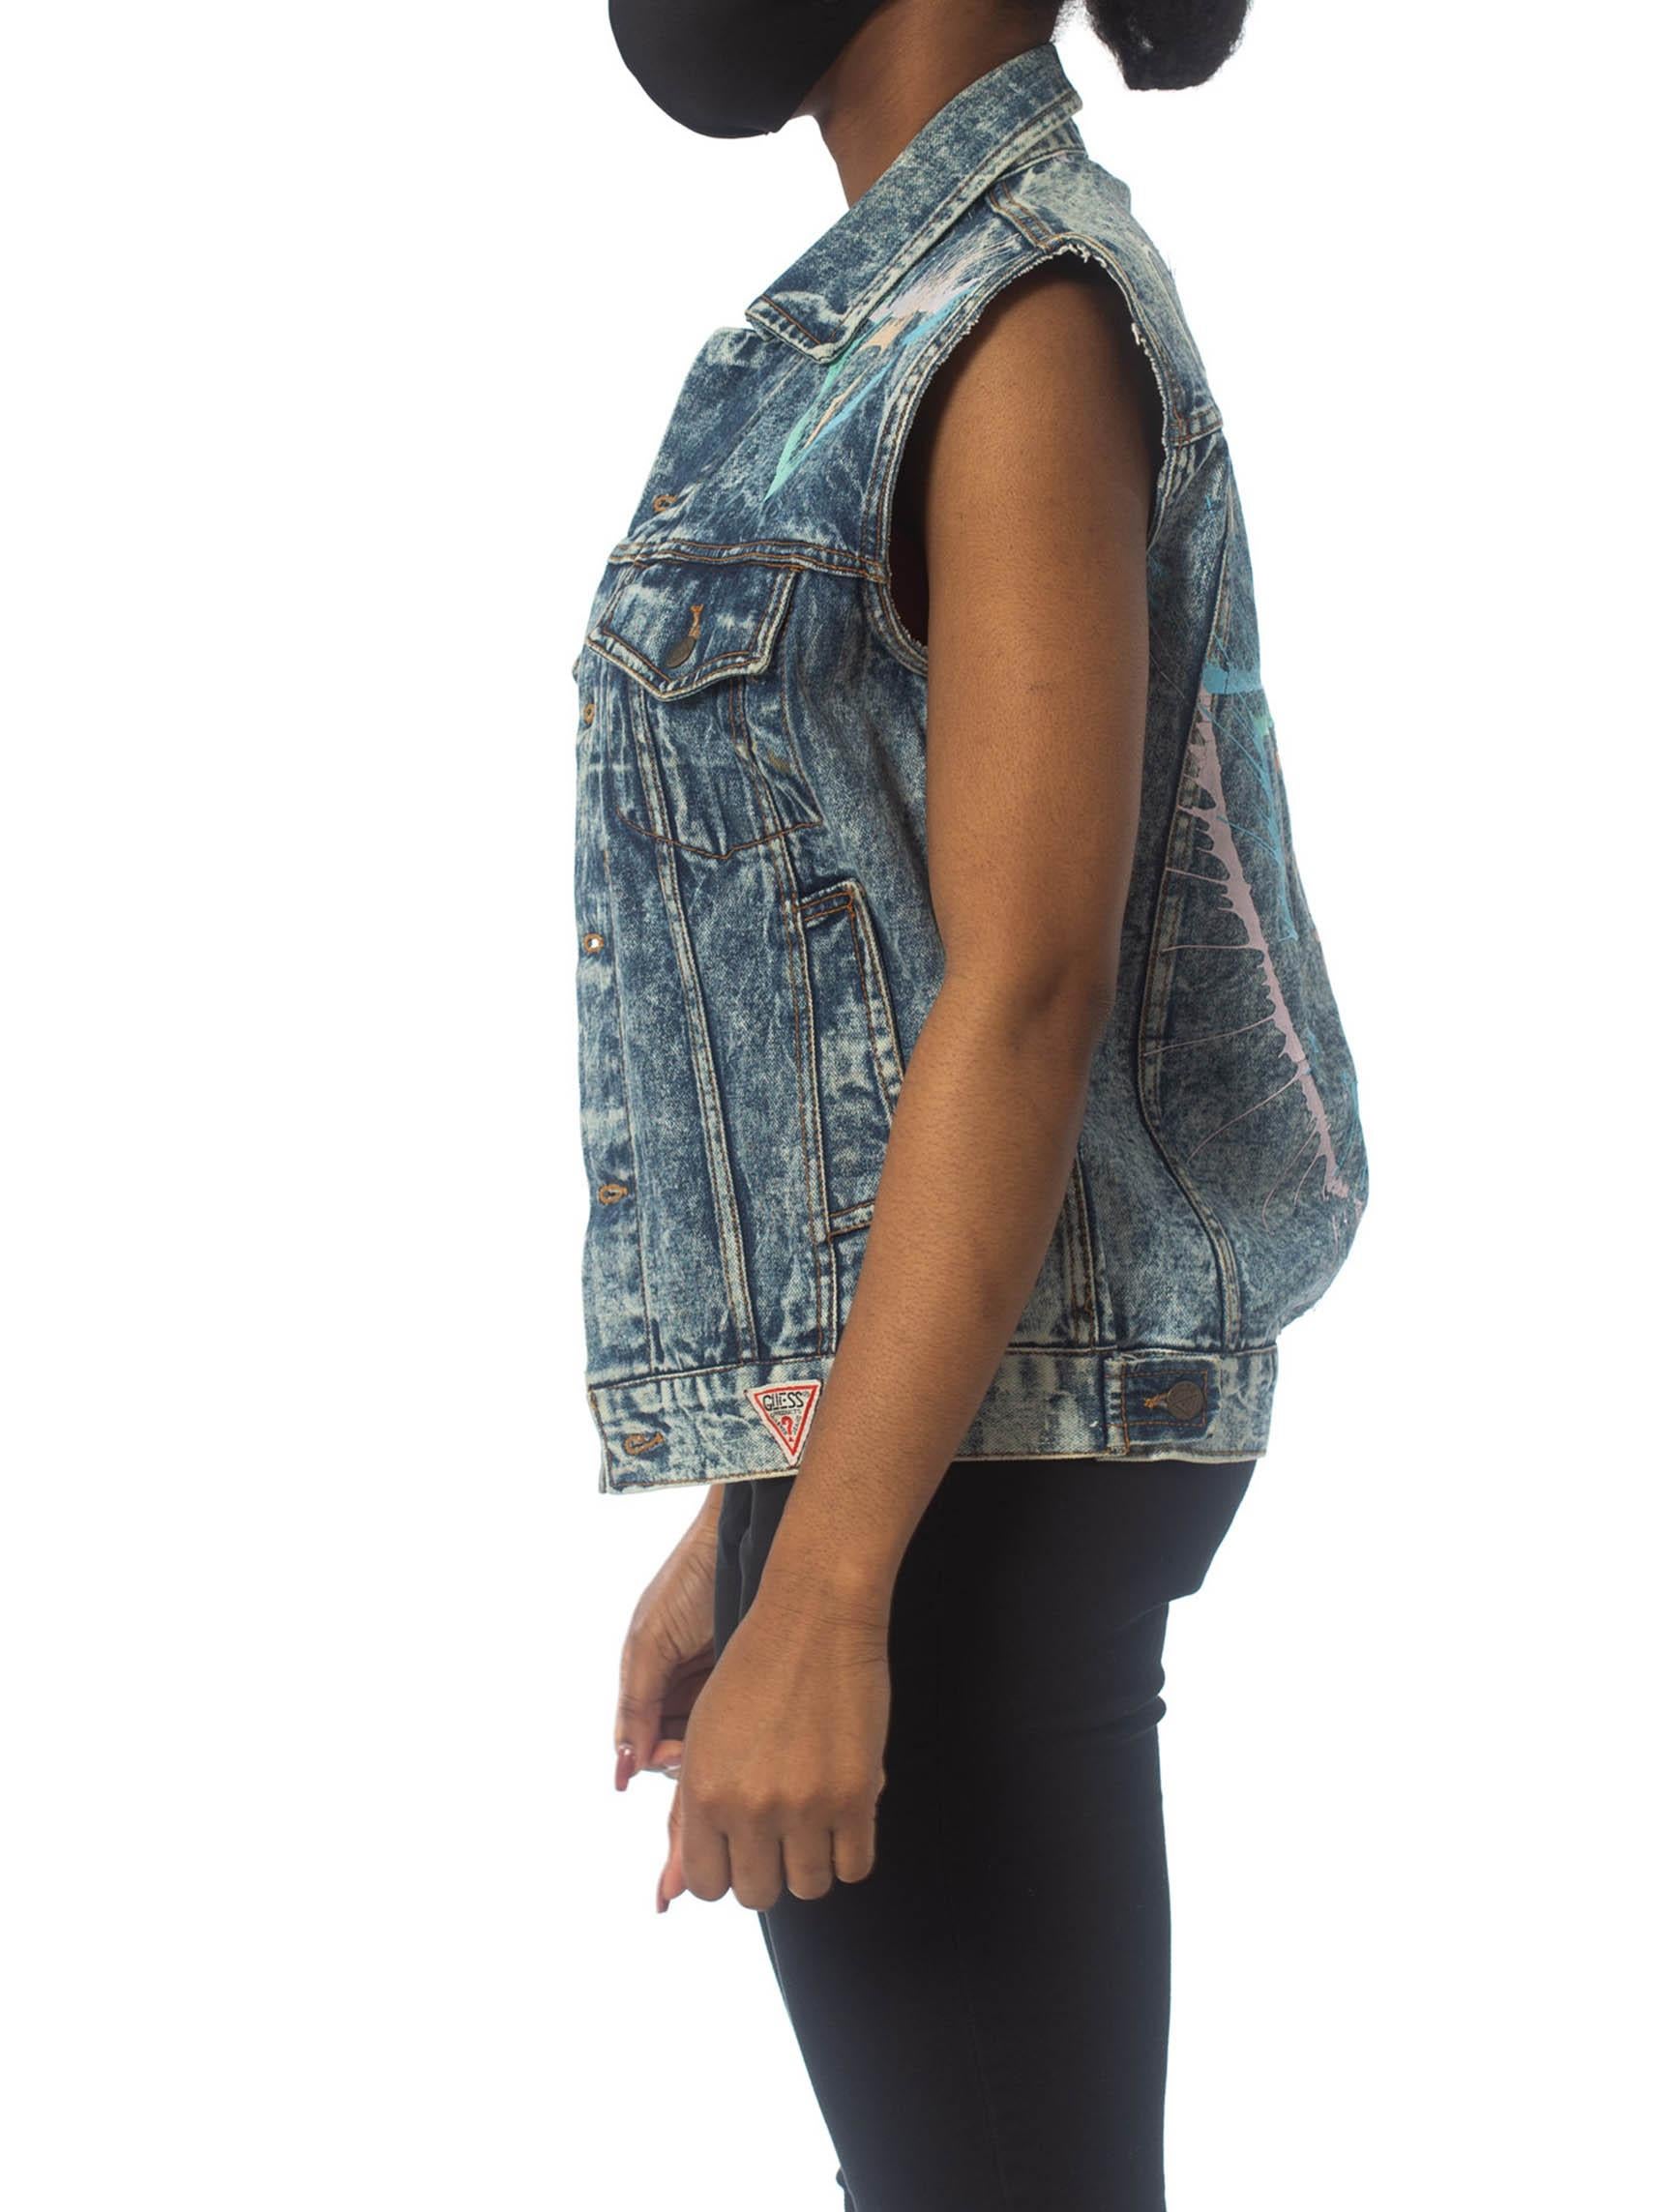 1990S GUESS Glitter Puffy Painted Acid Washed Denim Vest For Sale 3